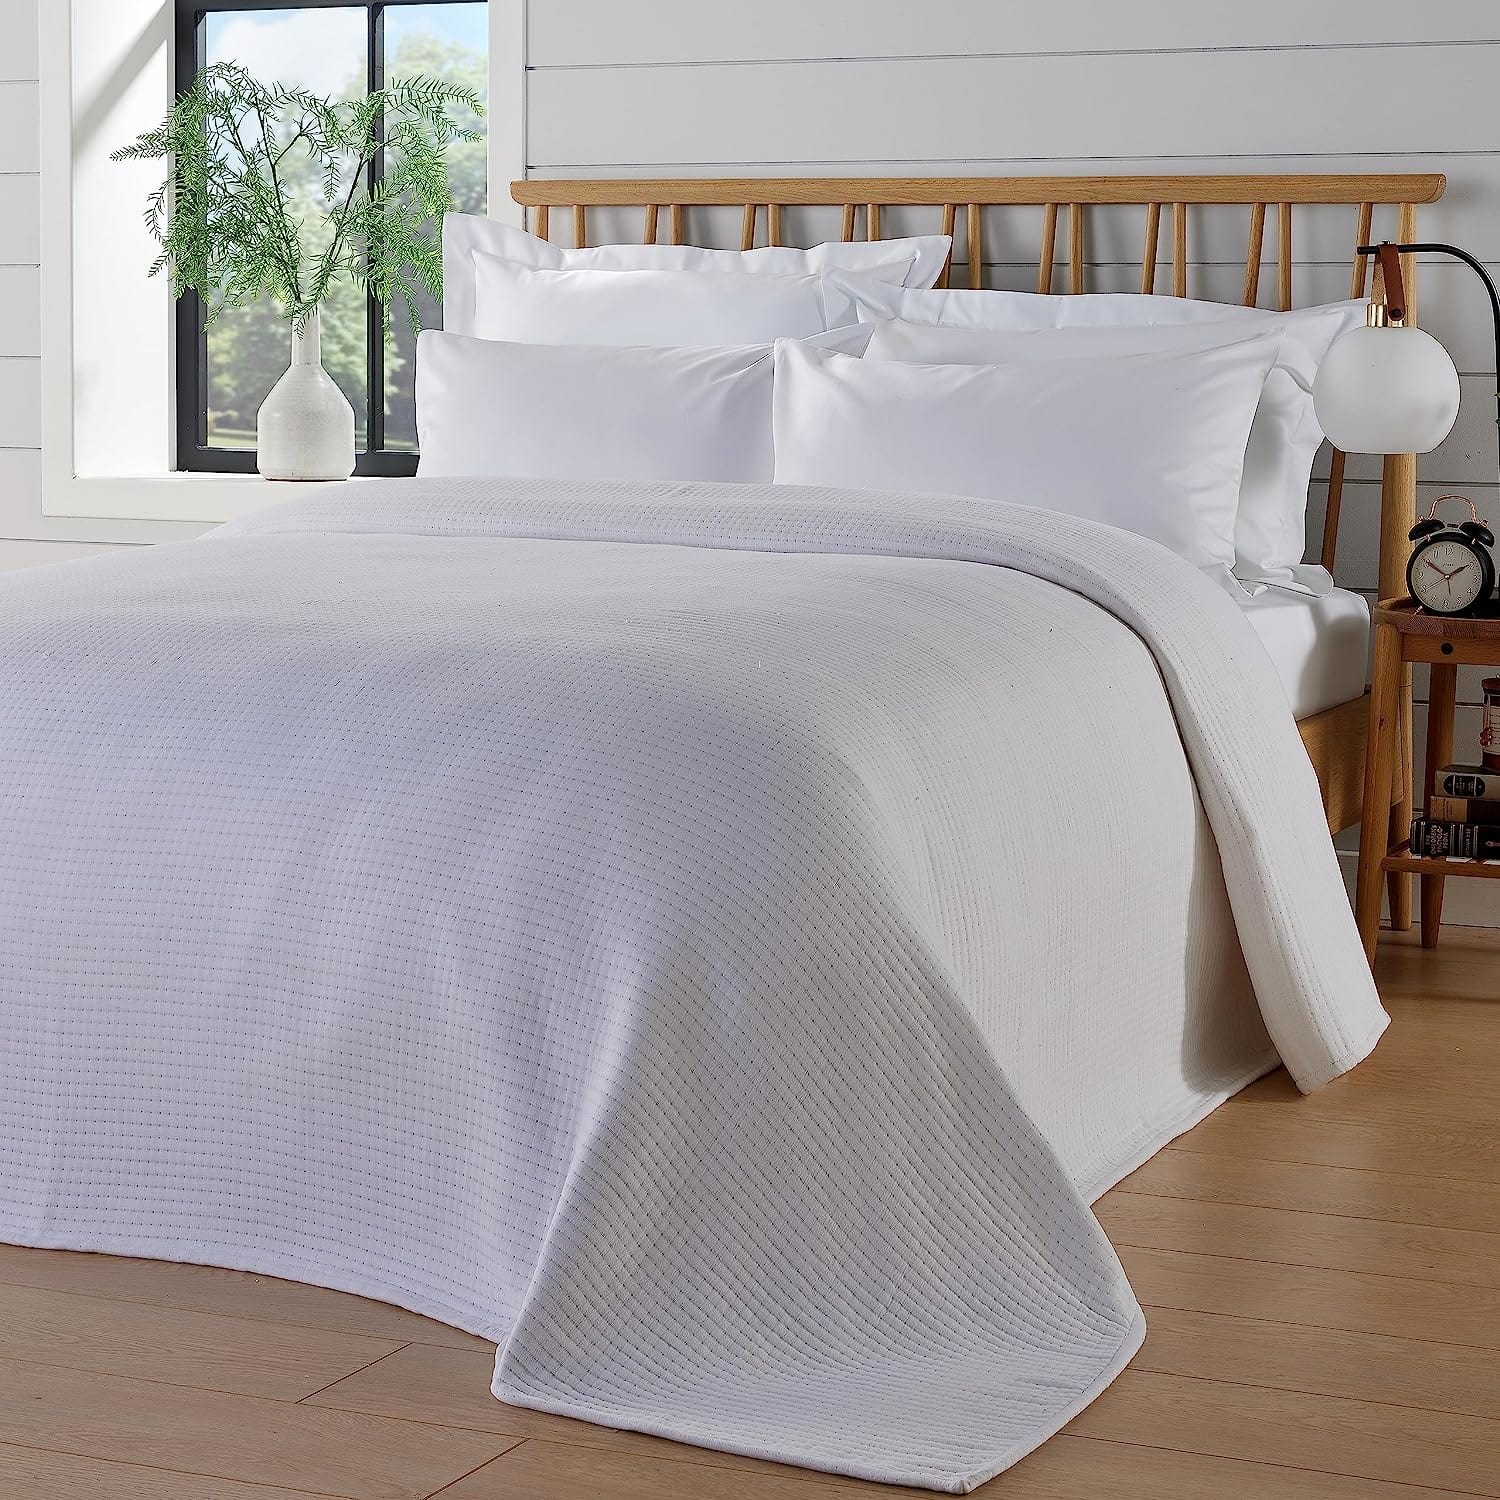 Hotel Collection Quilted Bedspread 240 x 260 CM / WHITE OLIVIA ROCCO Duvet Covers